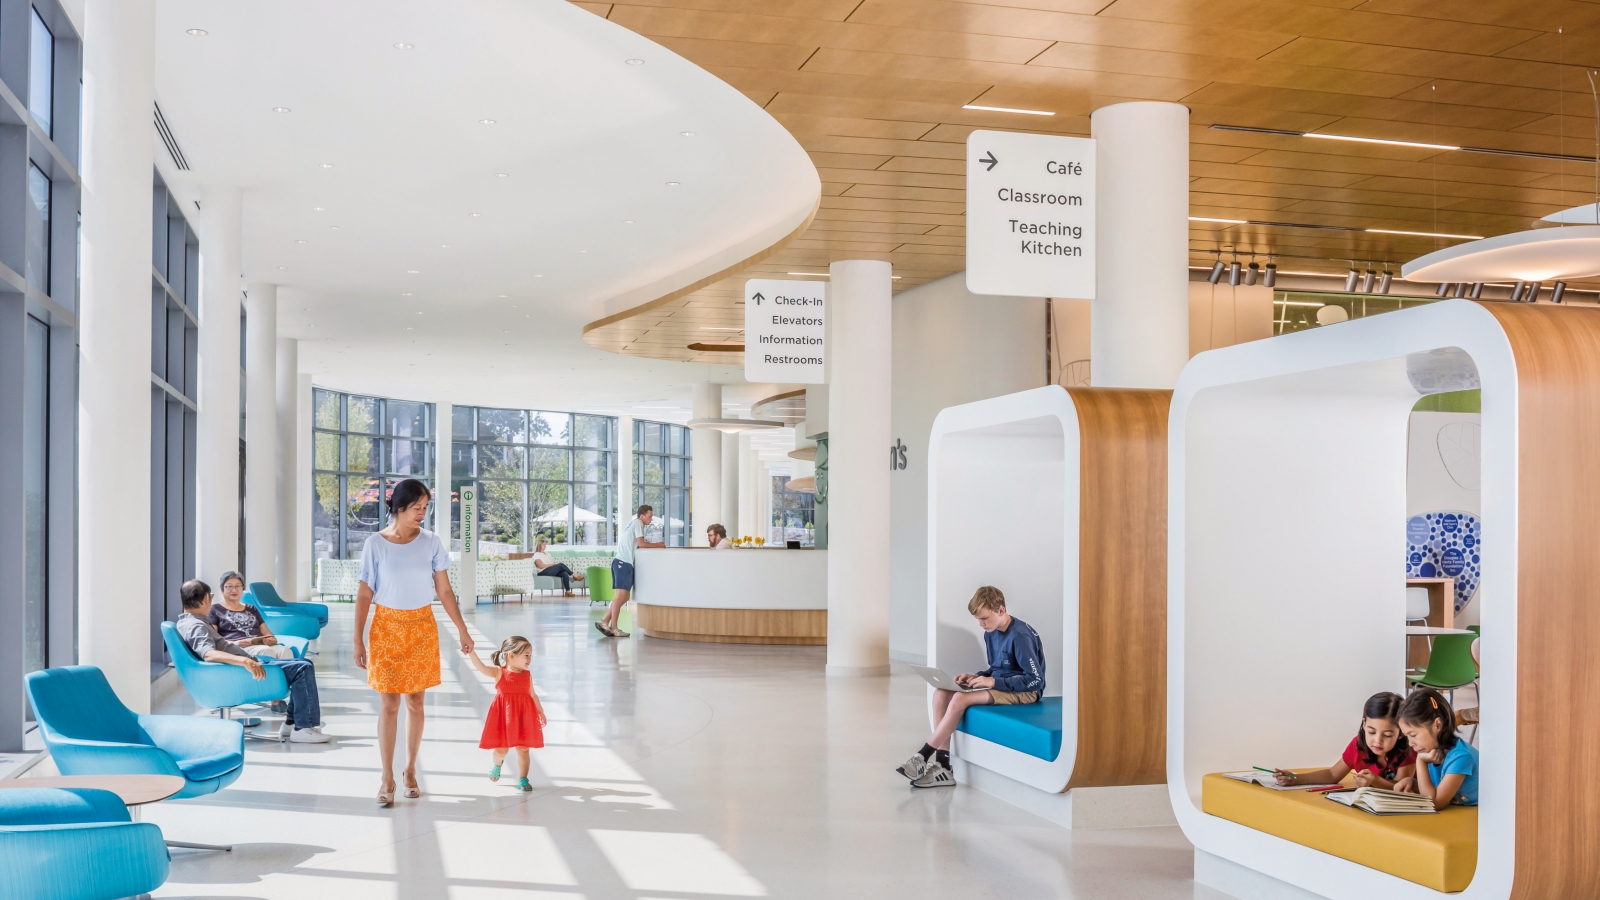 interior design of children's hospital with bright colors